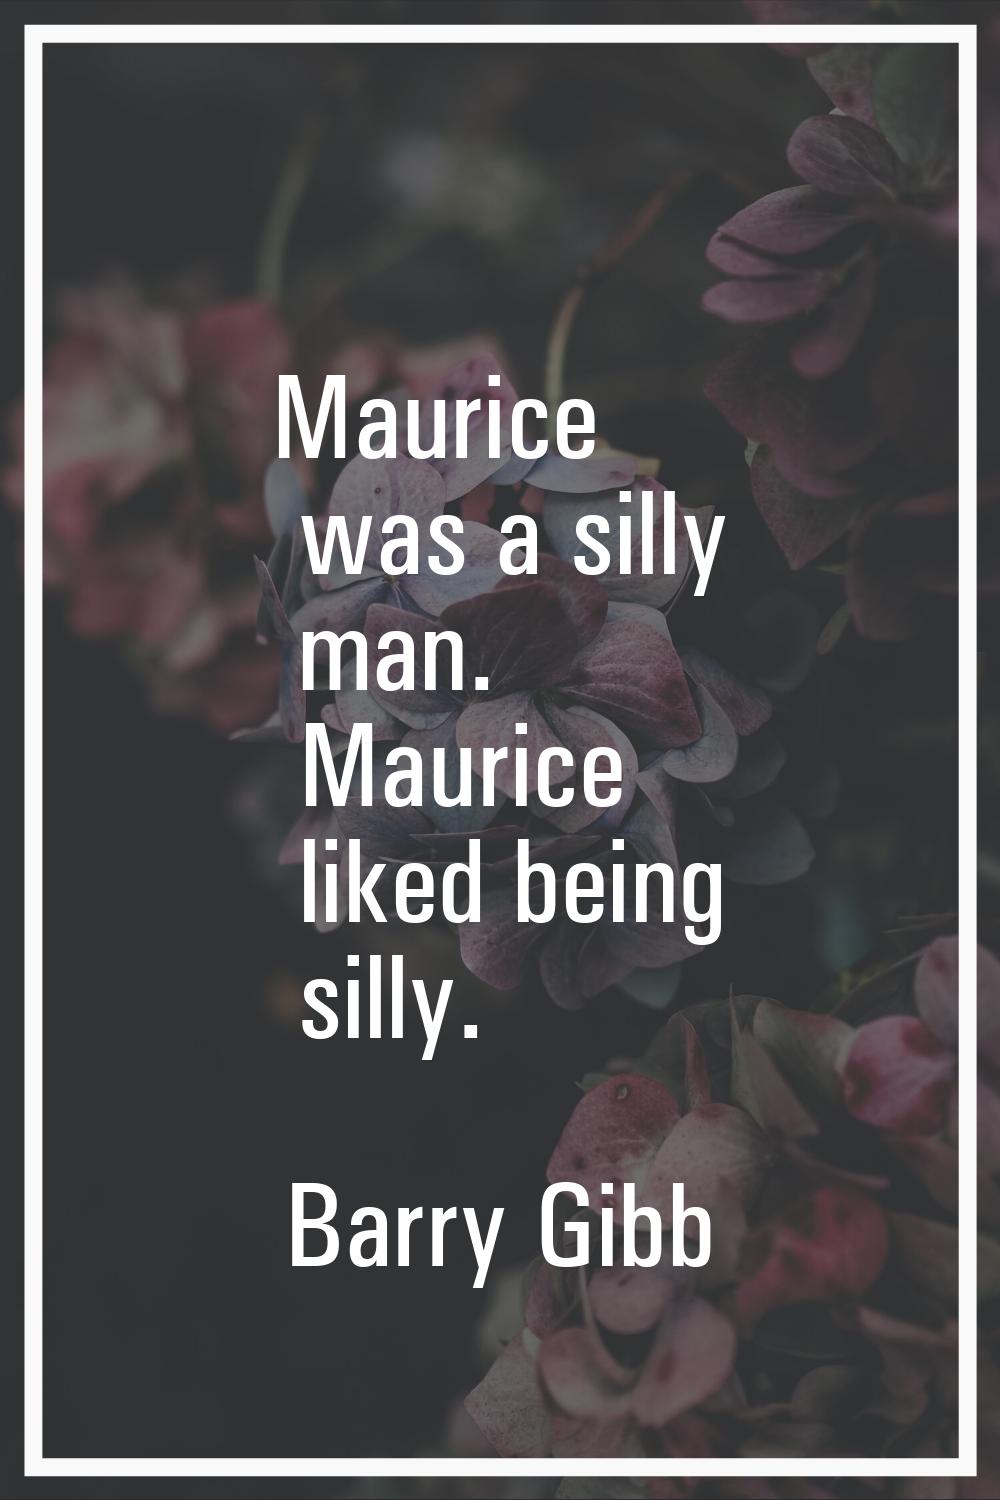 Maurice was a silly man. Maurice liked being silly.